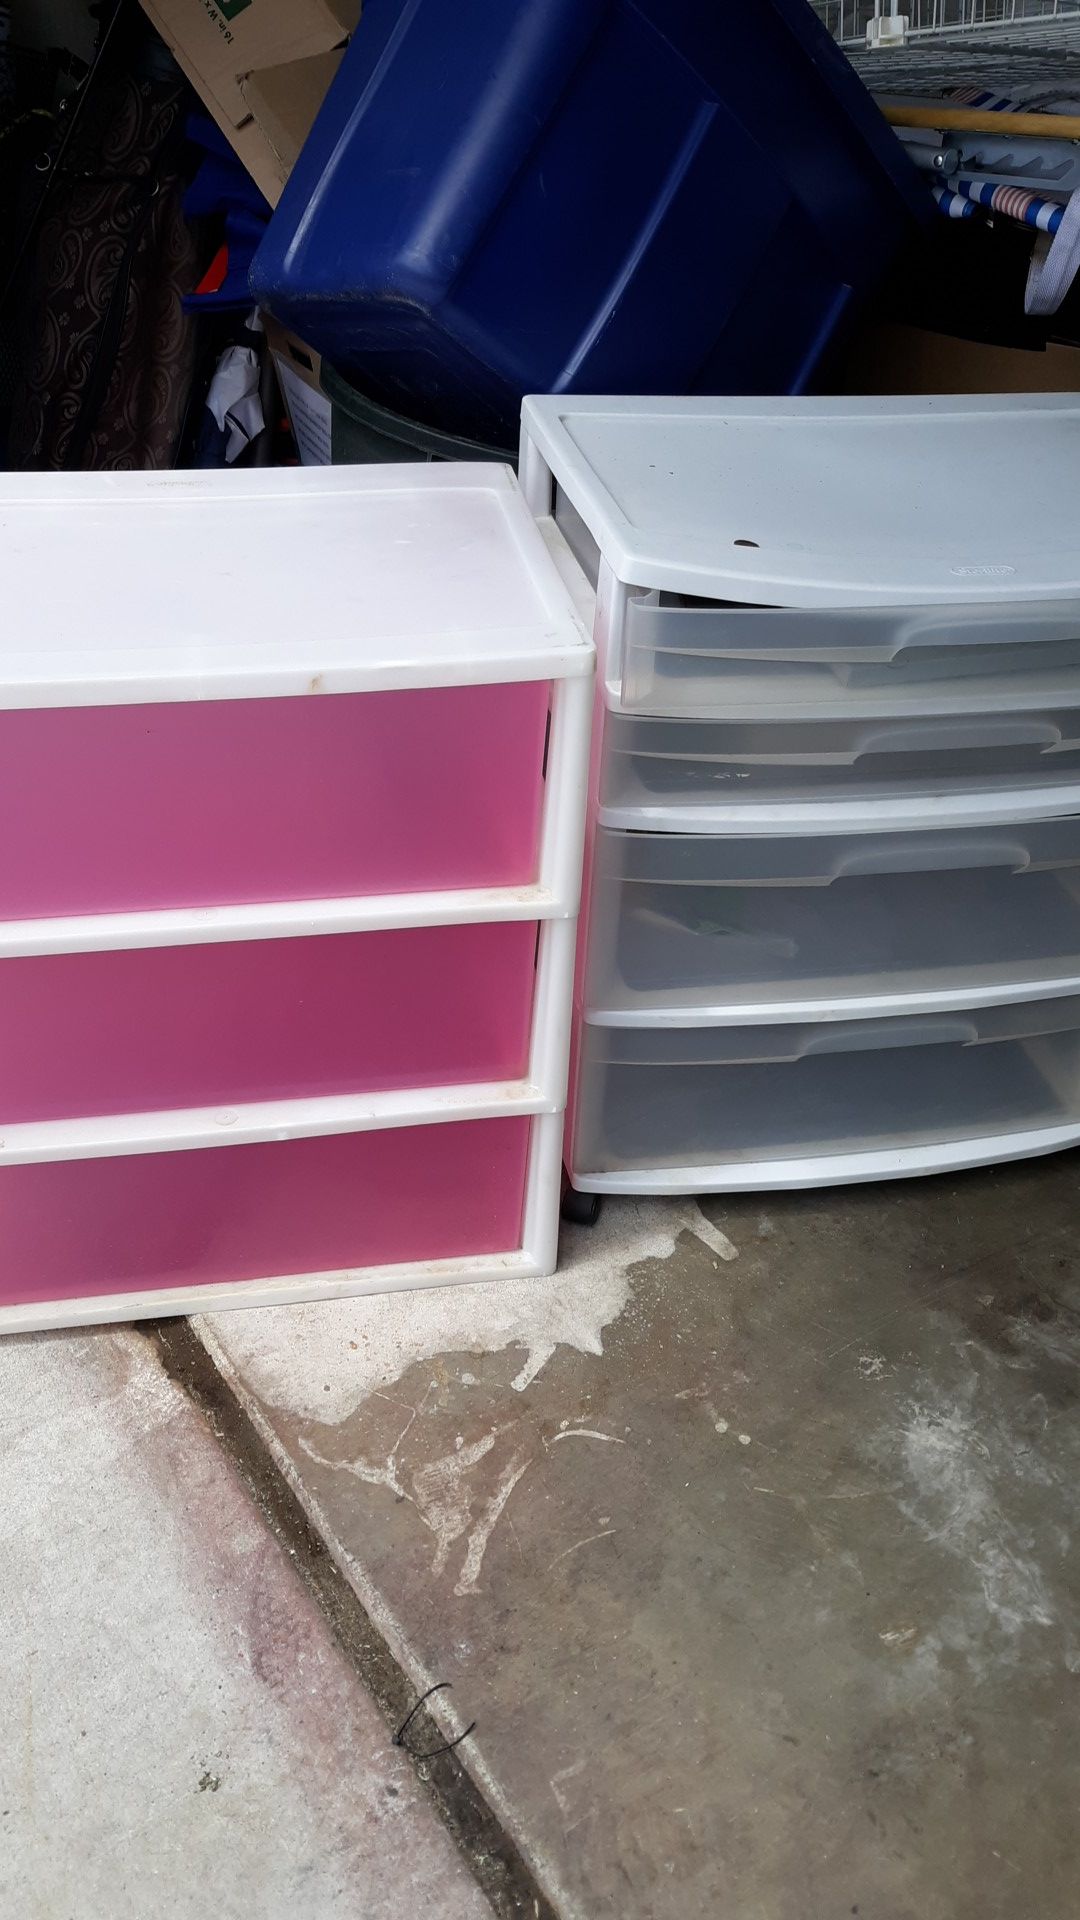 Plastic bins with drawers.